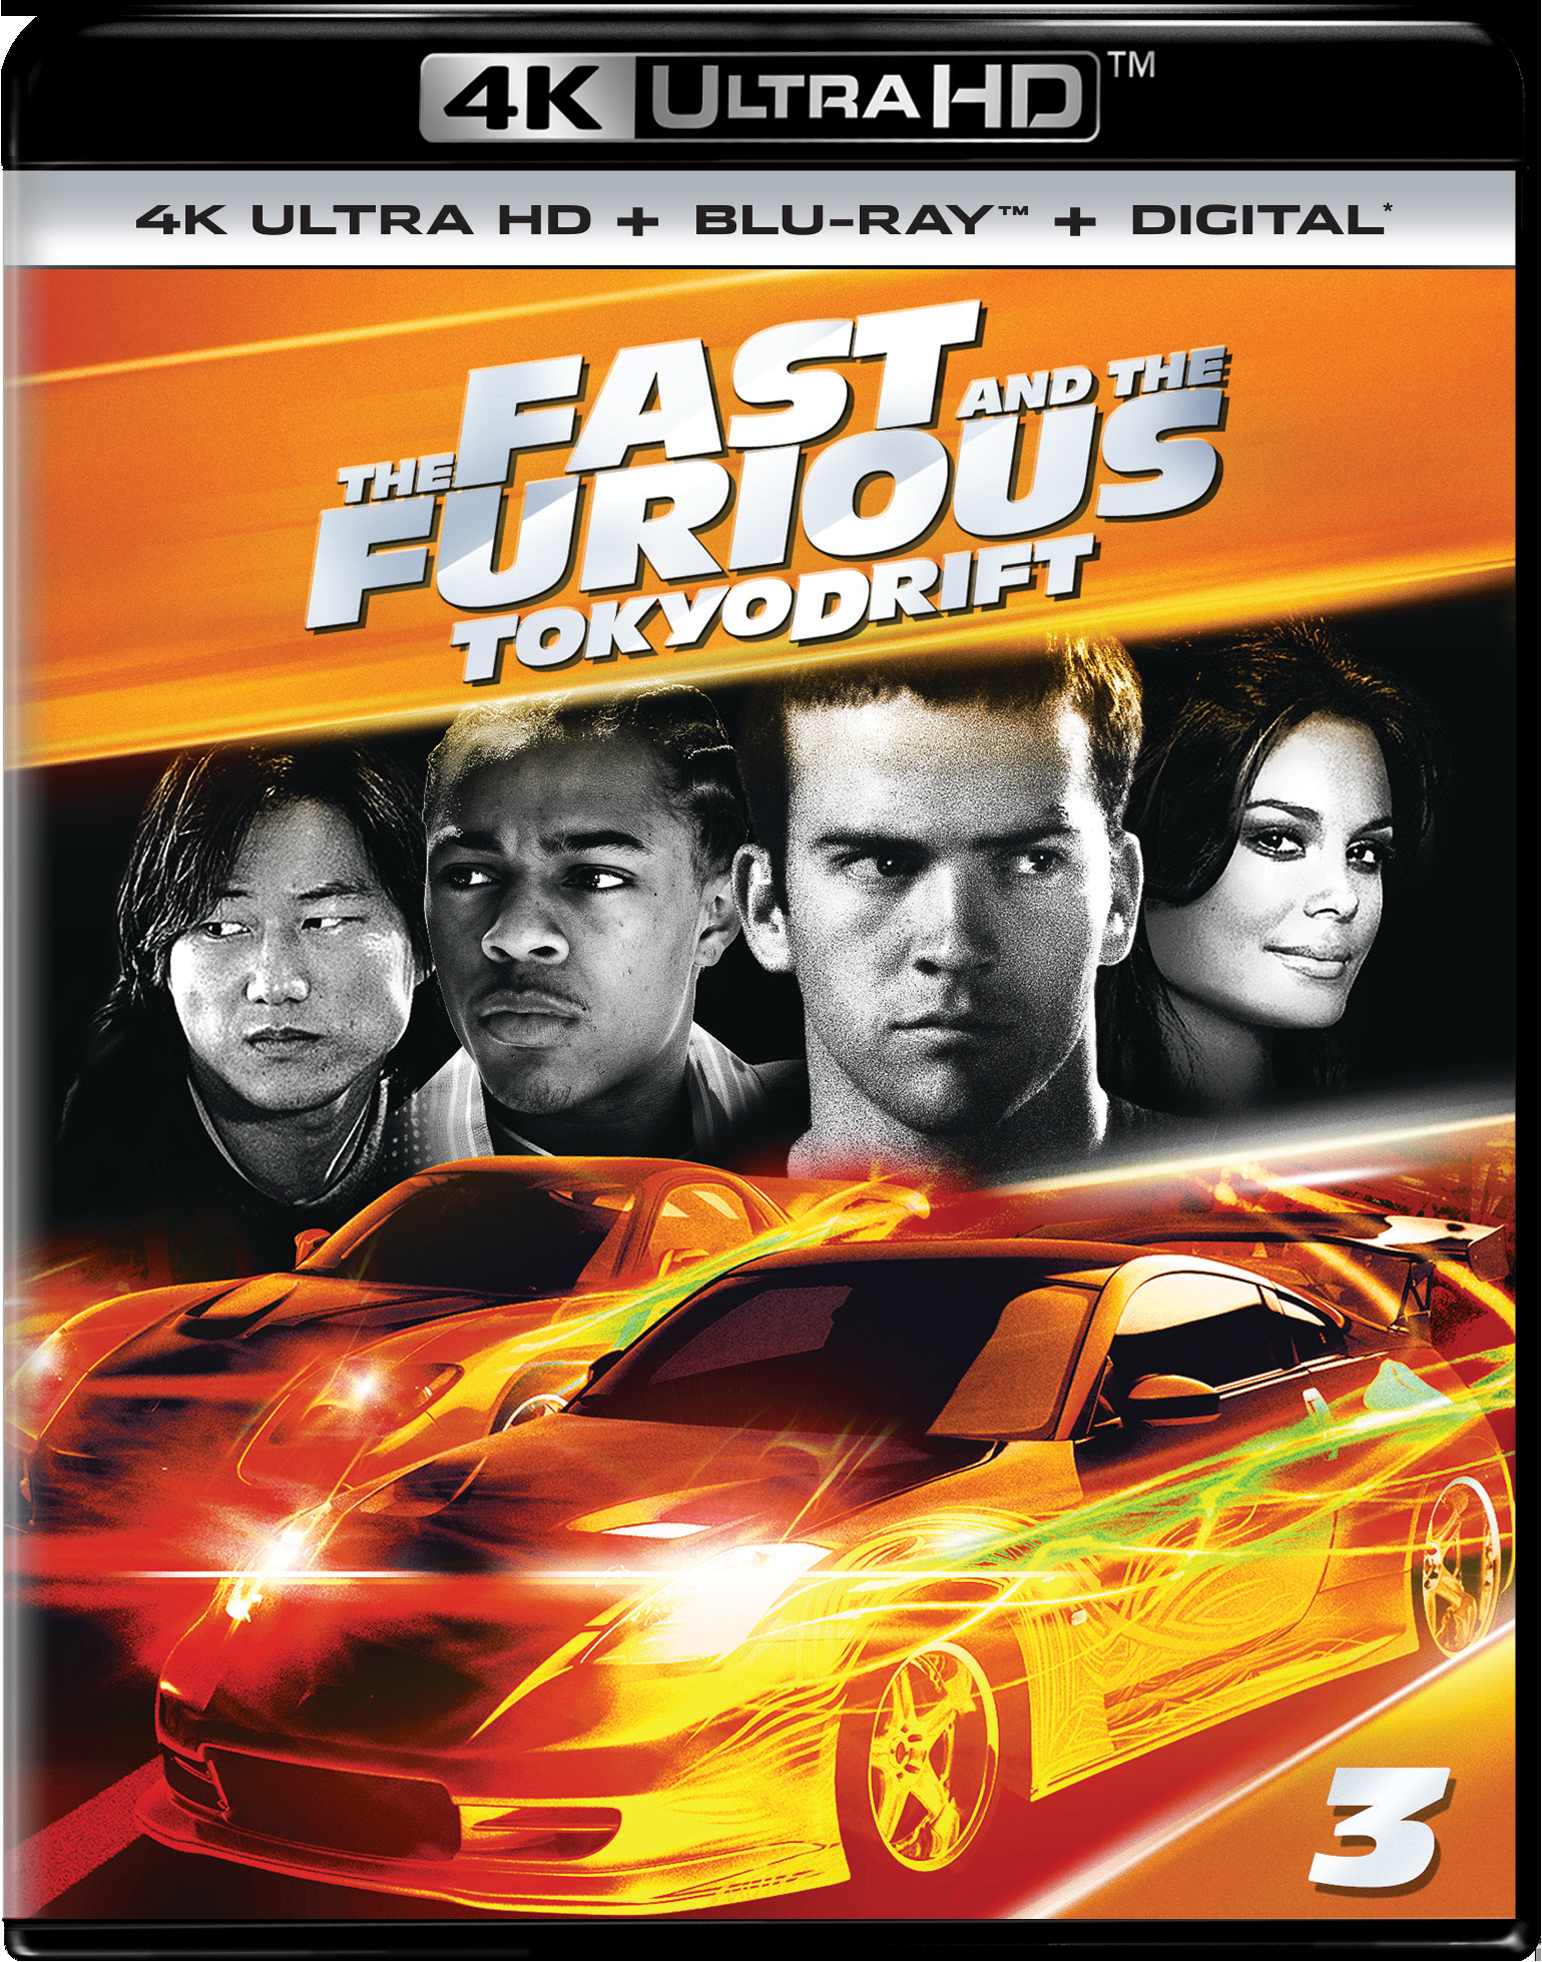 The Fast And The Furious: Tokyo Drift (4K Ultra HD) [UHD] | lupon.gov.ph